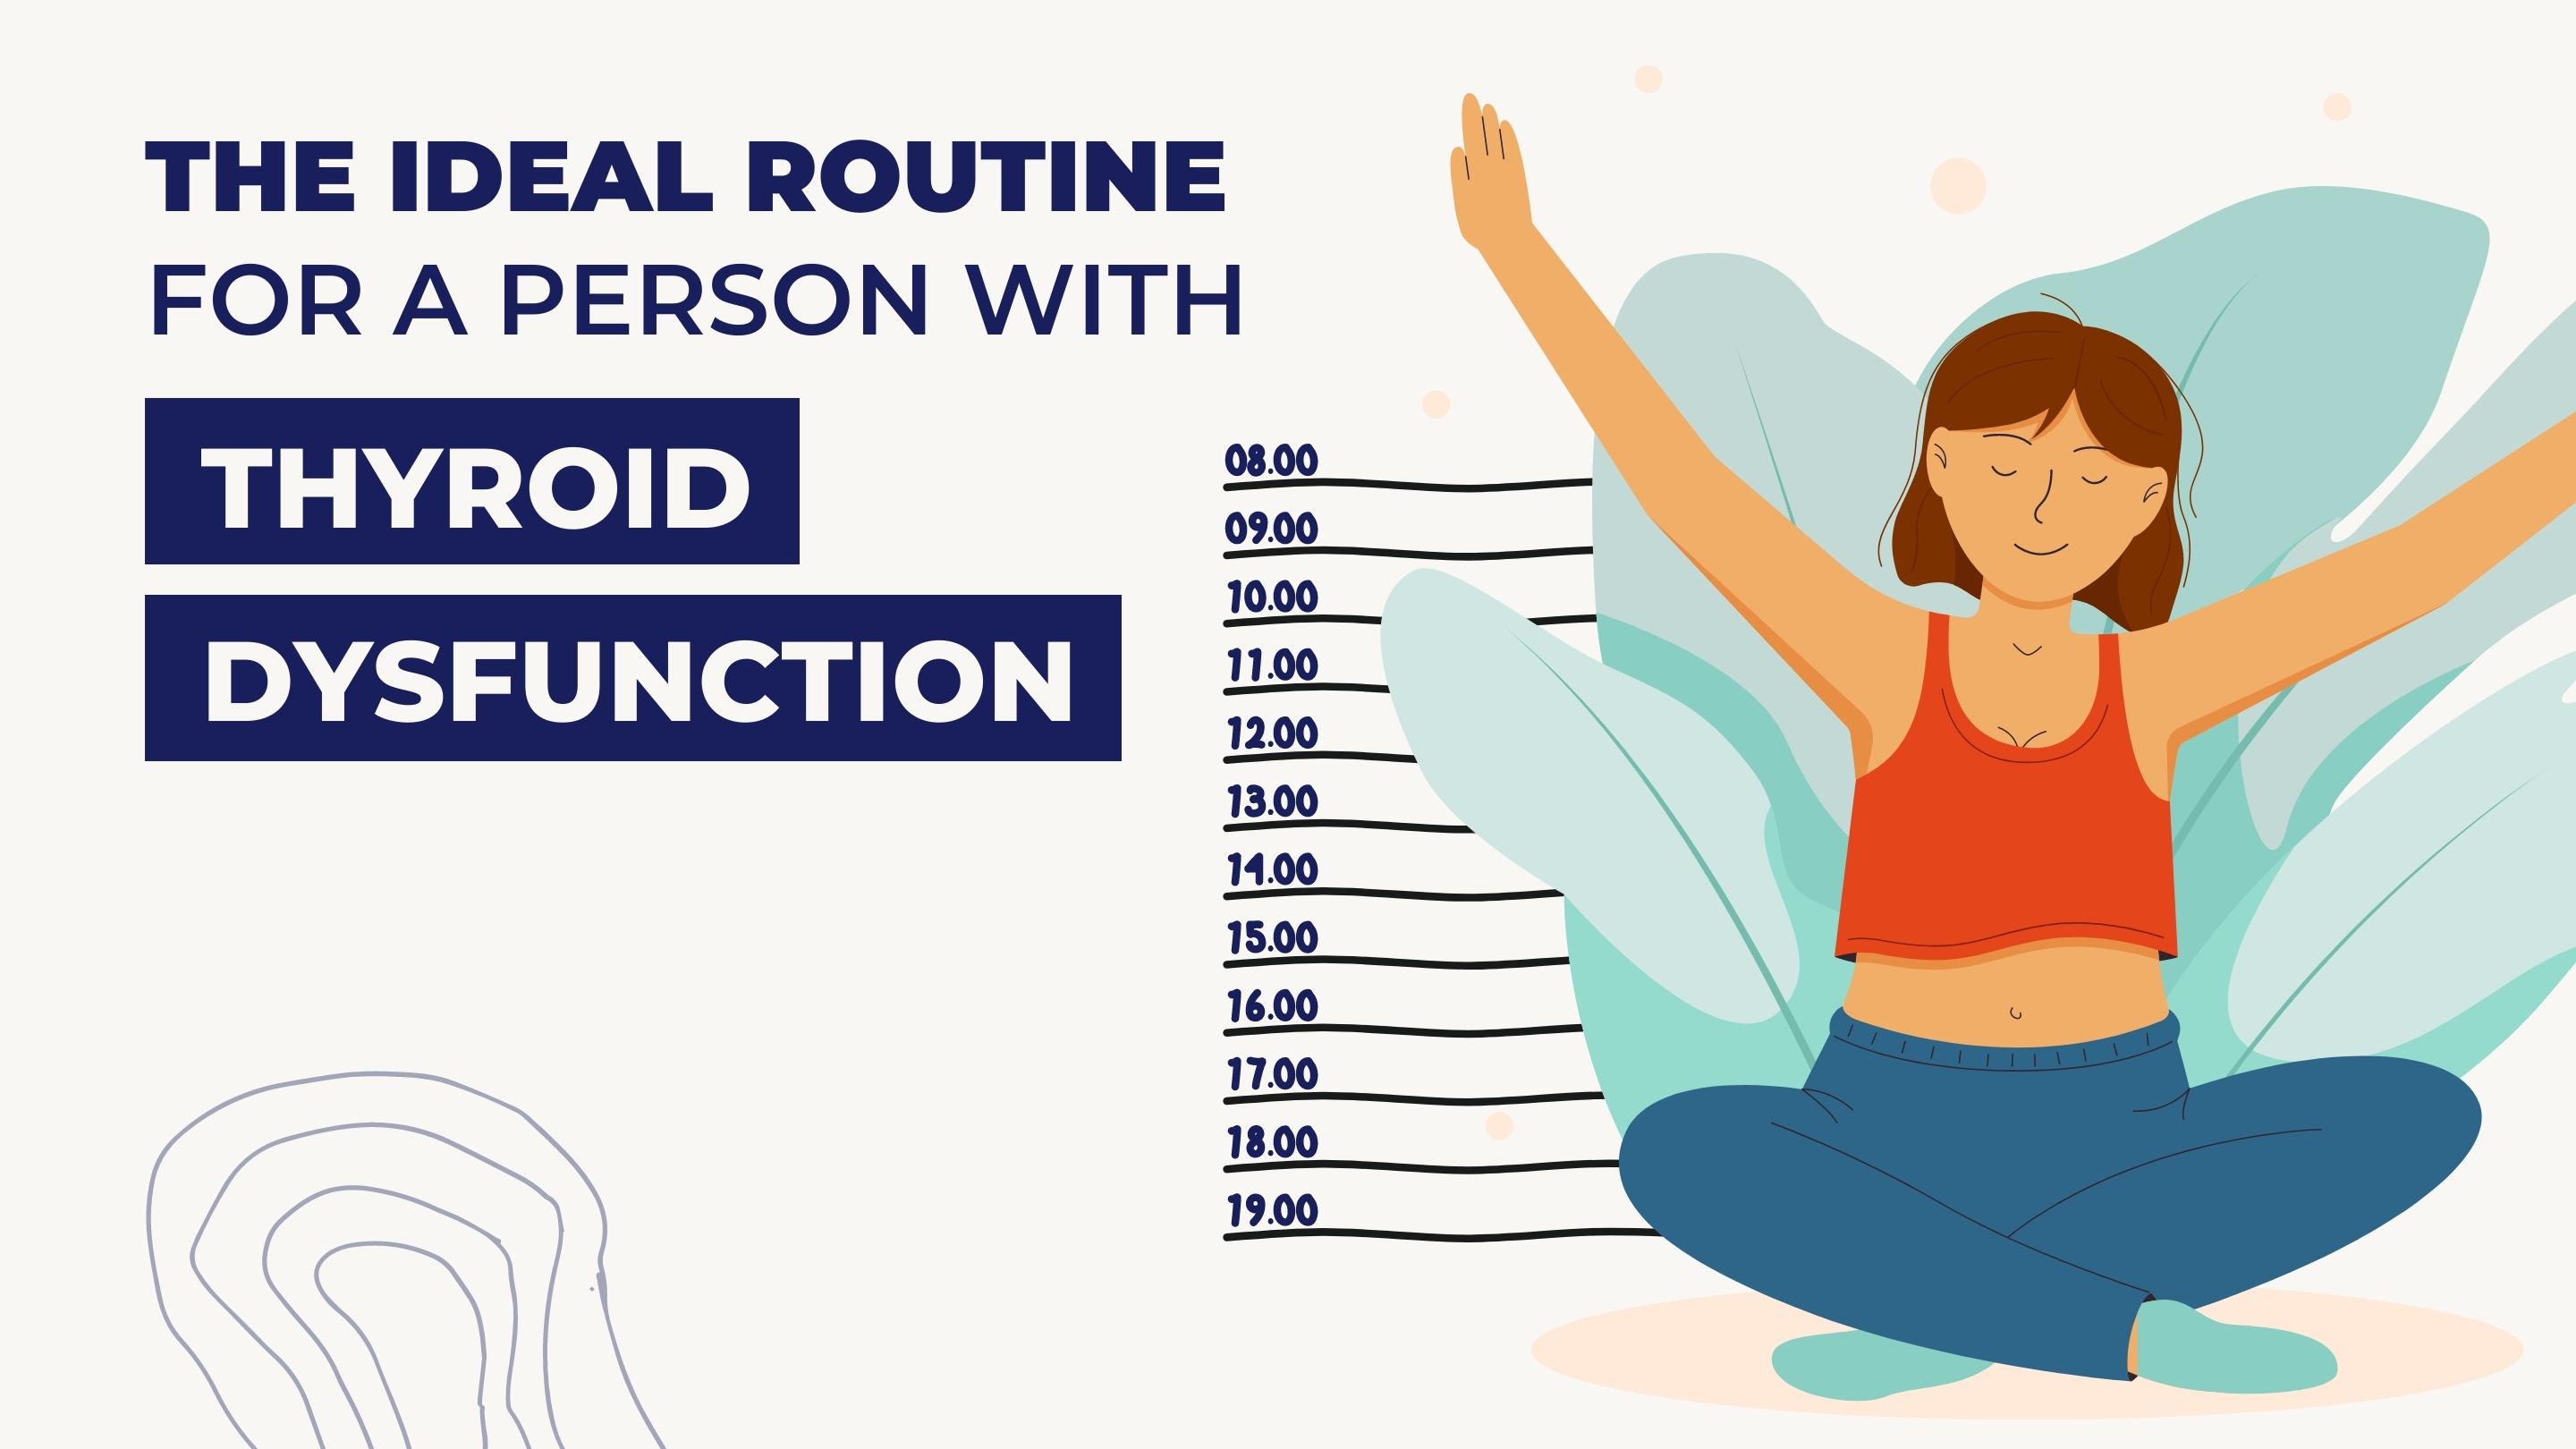 Routine for a person with thyroid dysfunction